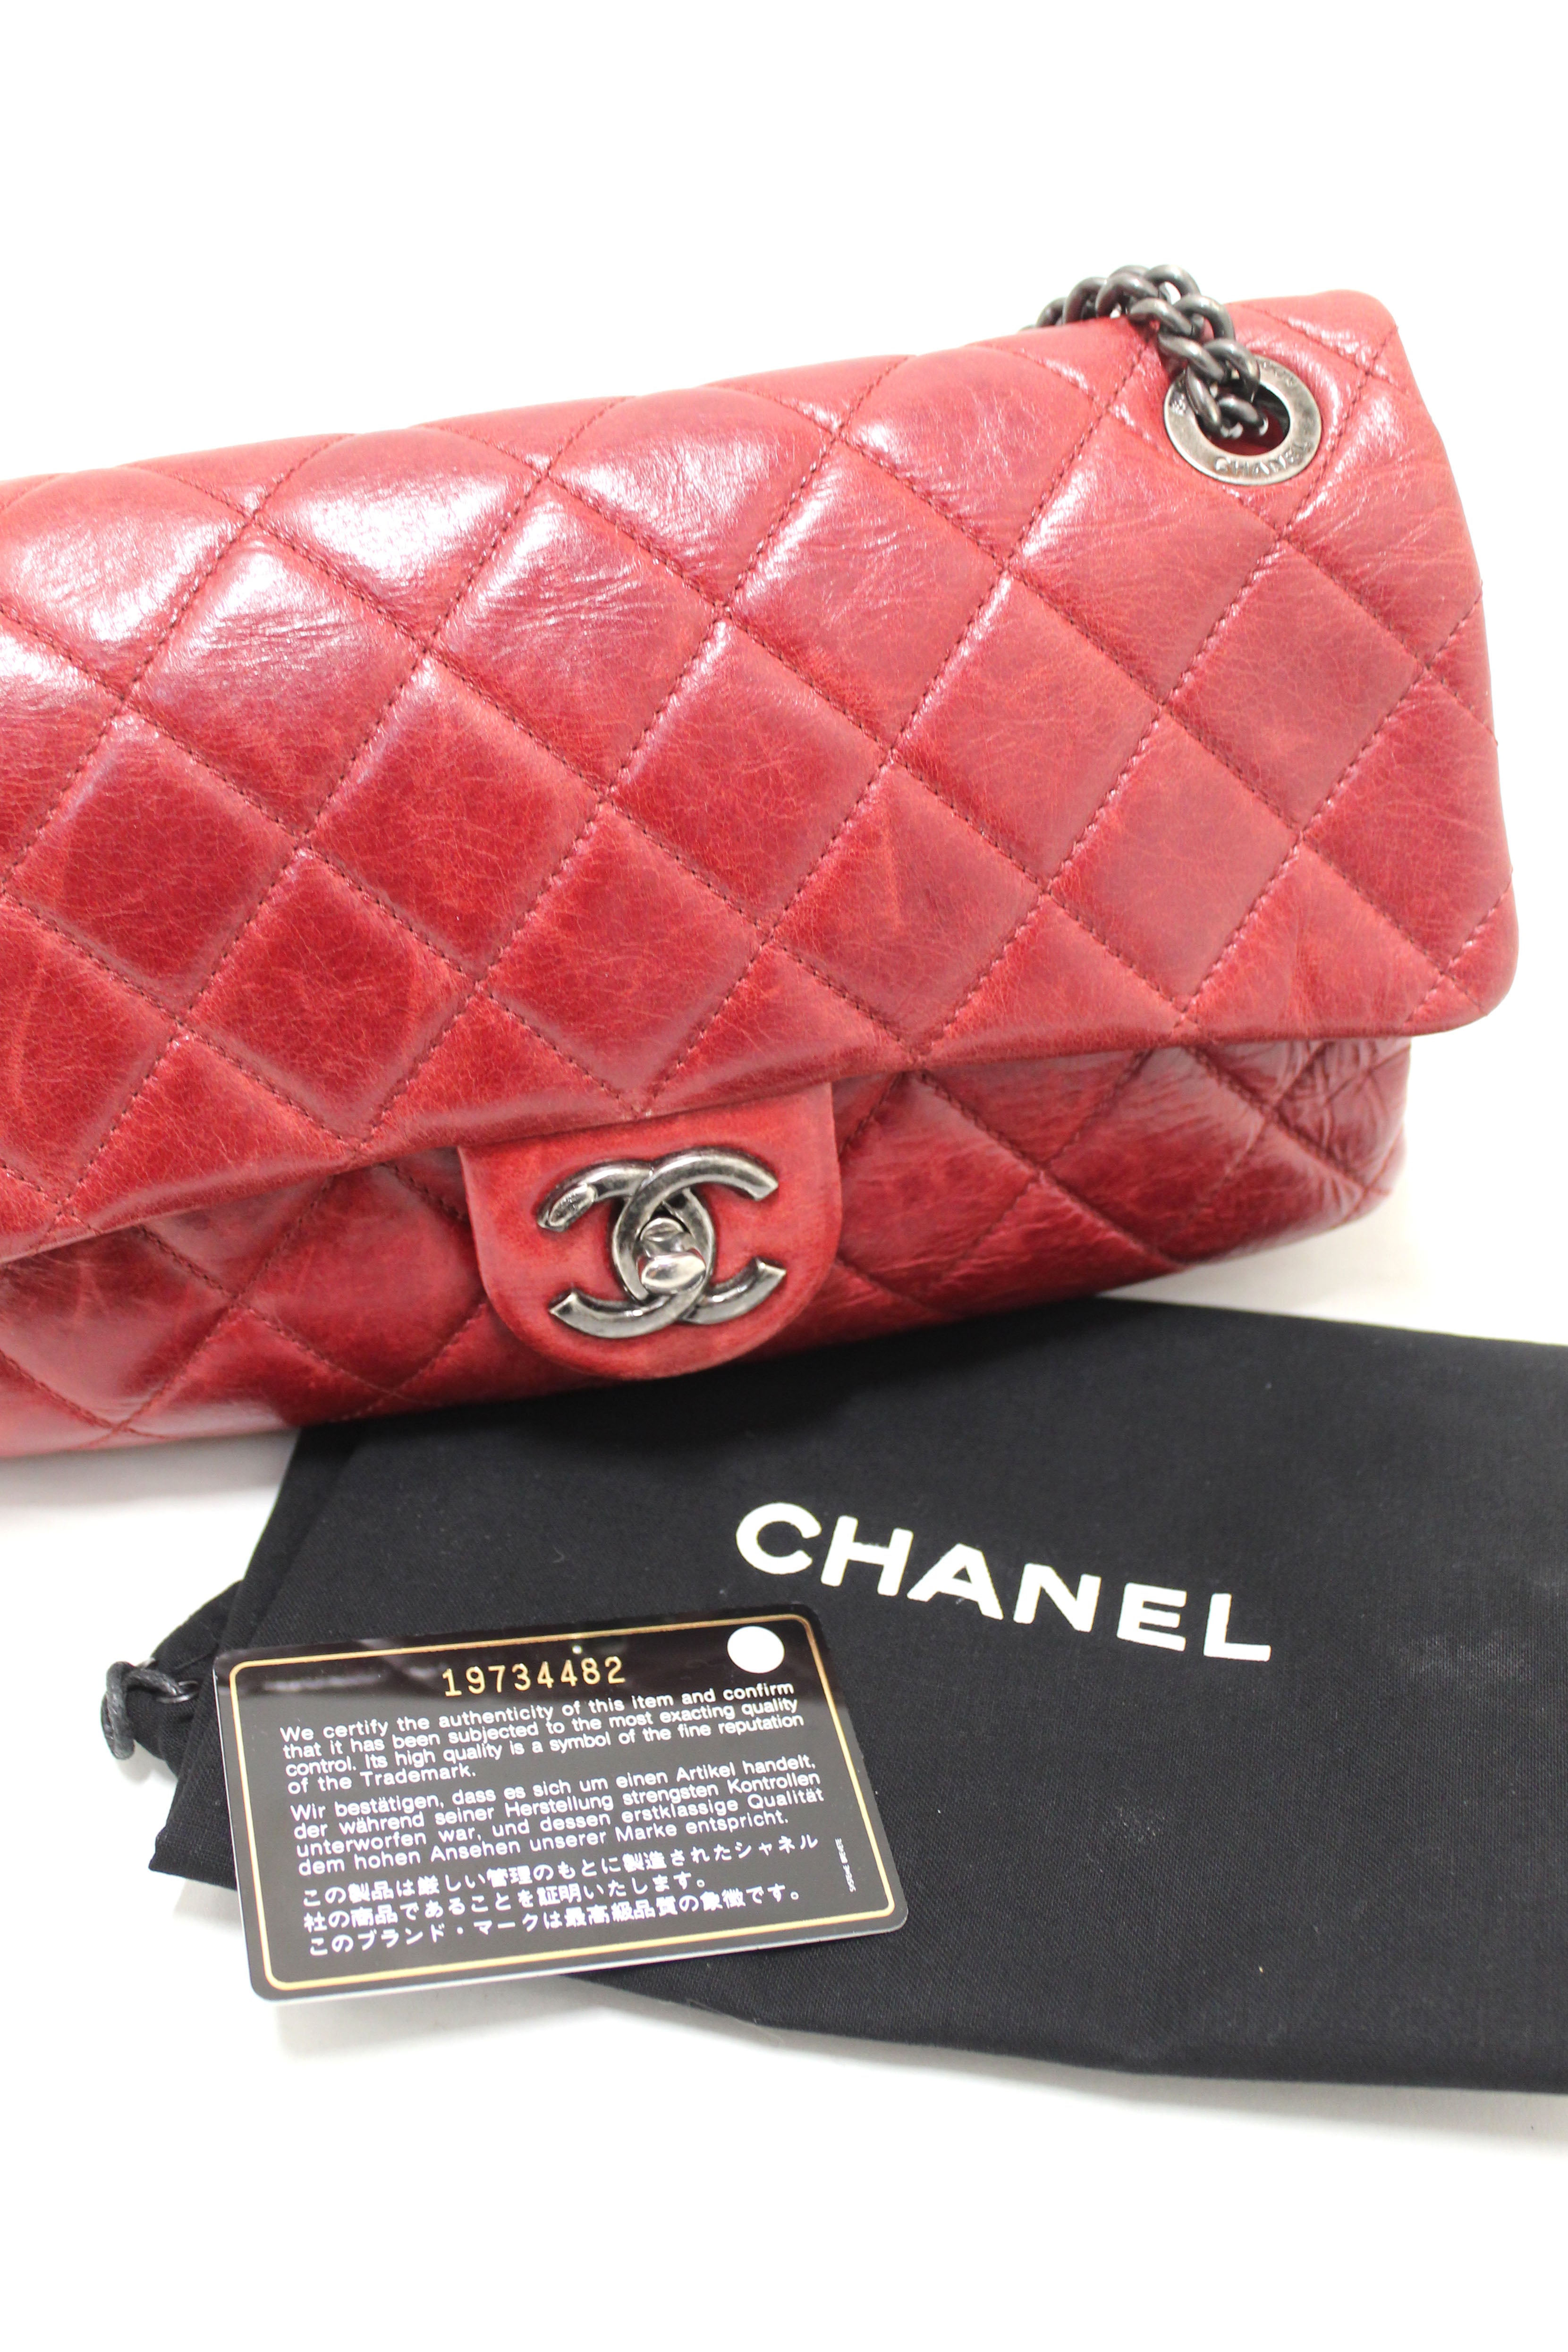 Authentic Chanel Hampton Double Stitch Quilted Flap Bag Crossbody Clutch  Receipt | eBay